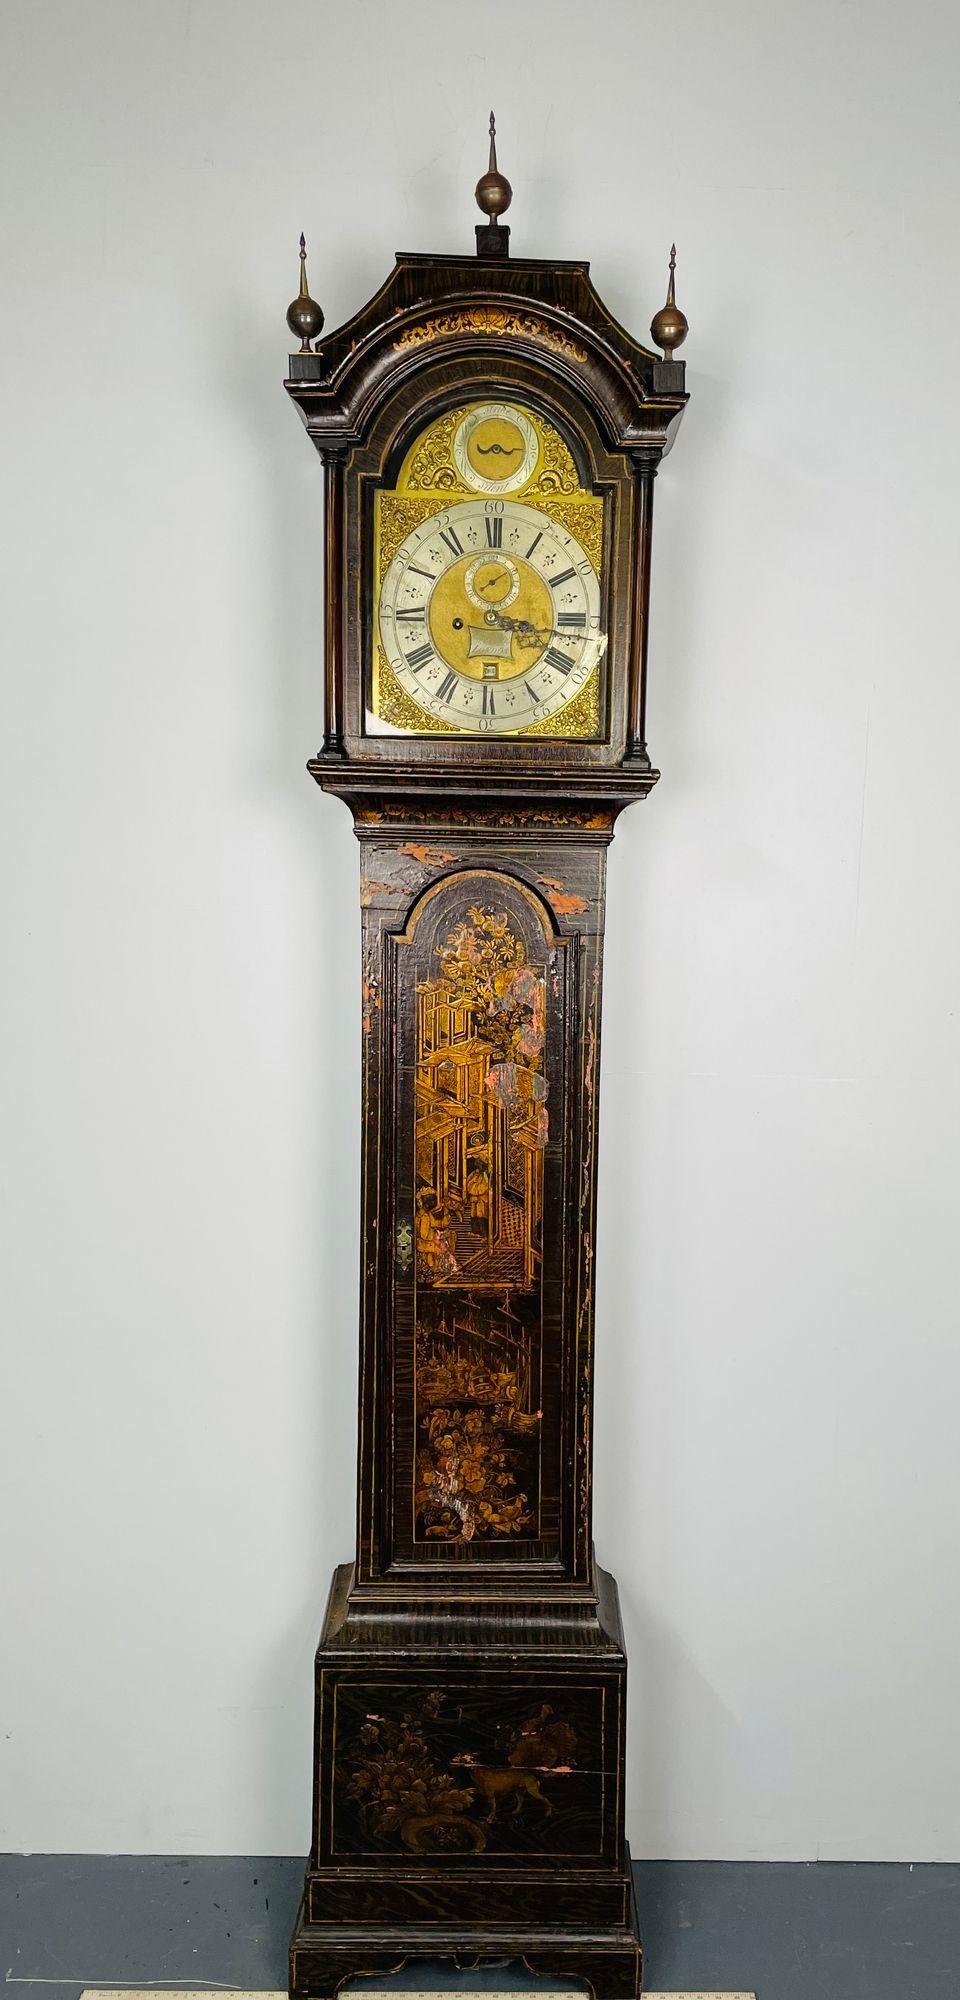 George III Chinoiserie Tall case clock, Grandfather Clock, Faux Bois, 18th Century,

Finest Chinoiserie Tall Case Clock. Stunning 18th Century pedimented bonnet top with finials. Arched door revealing a steel and steel brass face signed 'Fran.